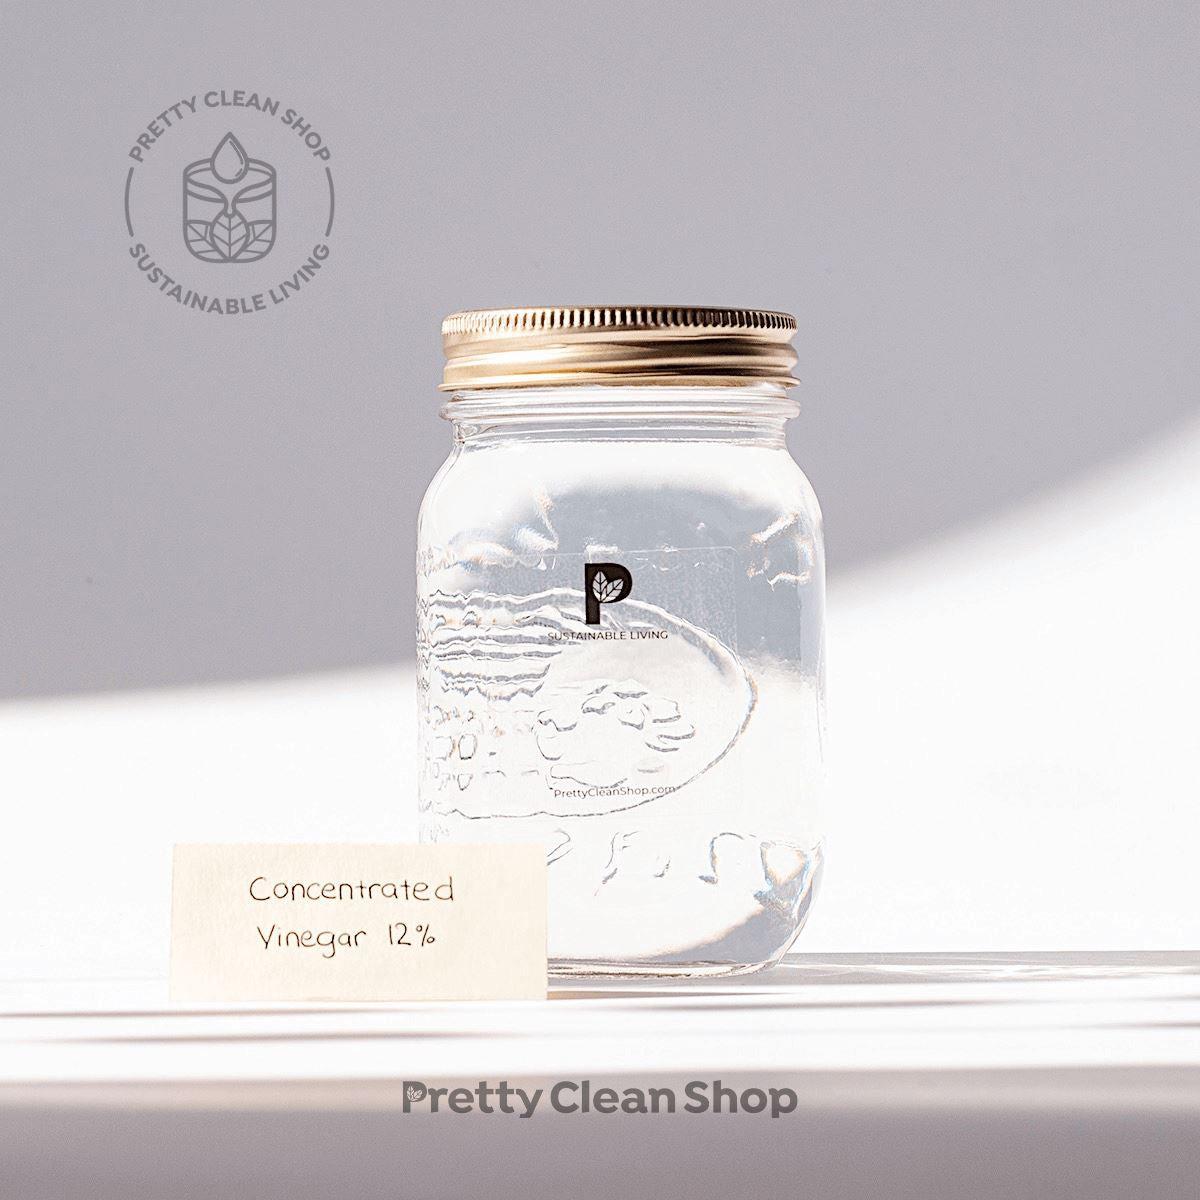 Concentrated Cleaning Vinegar 12% Cleaning Pure 1L glass jar (REFILLABLE, includes $1.25 deposit) Prettycleanshop